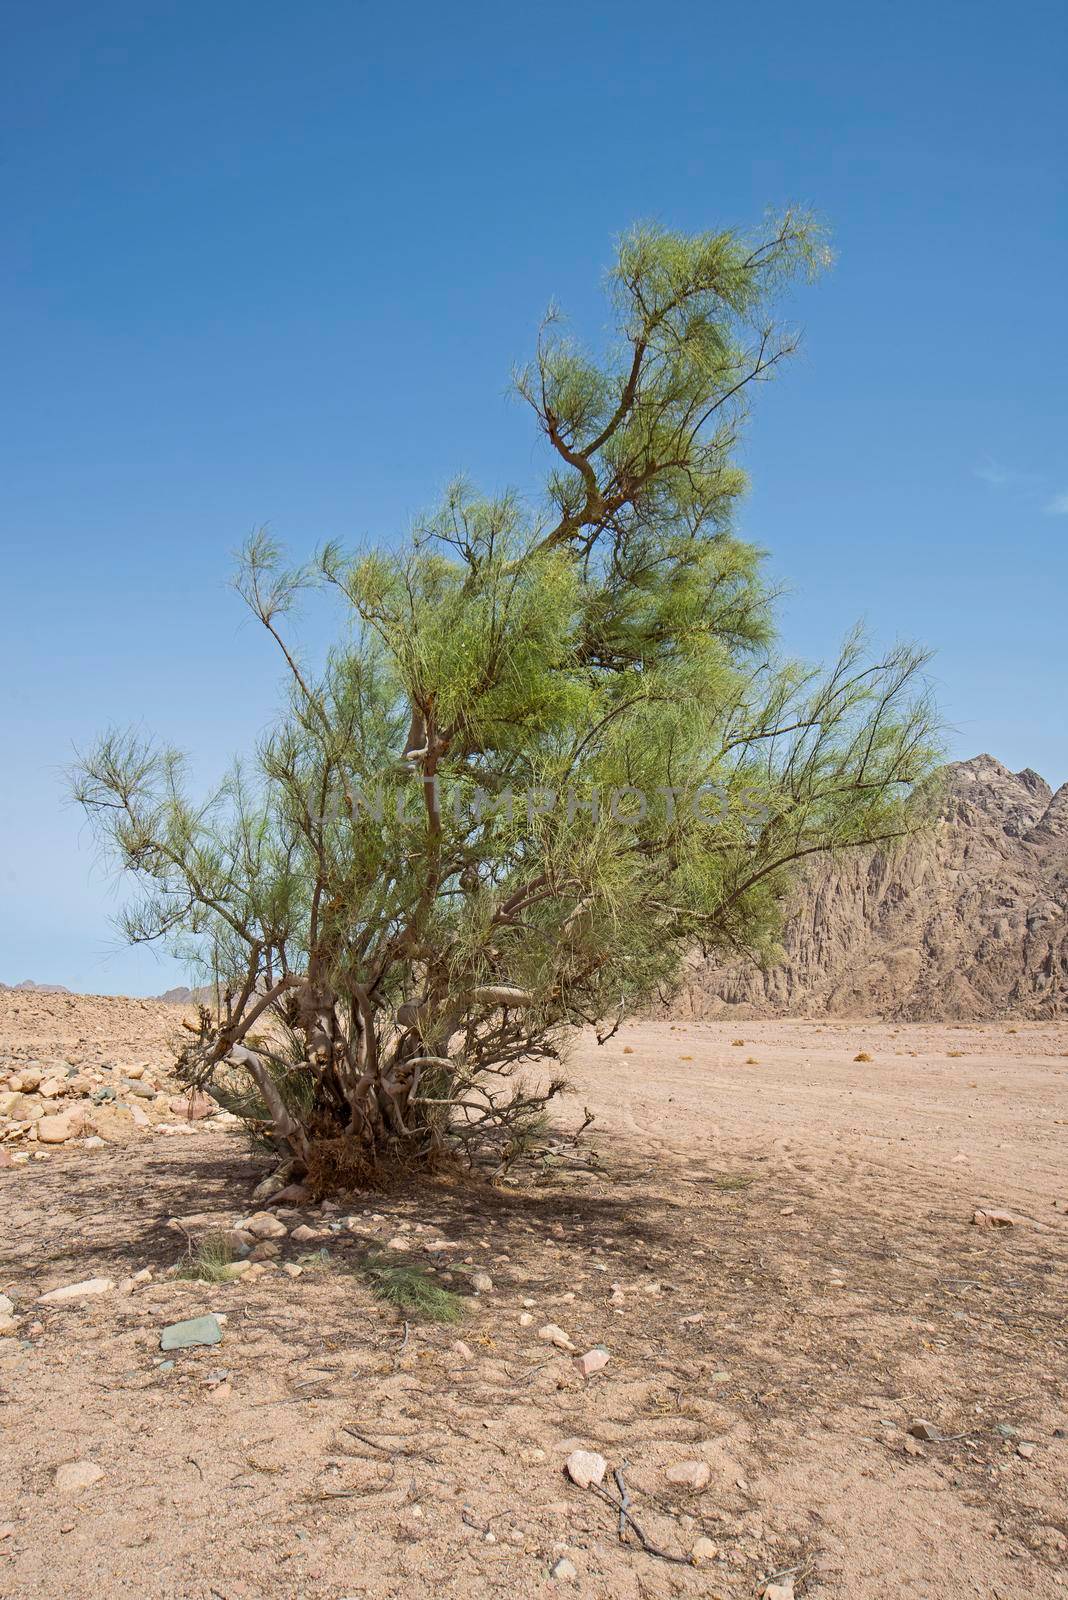 Barren desert landscape in hot climate with acacia tree by paulvinten